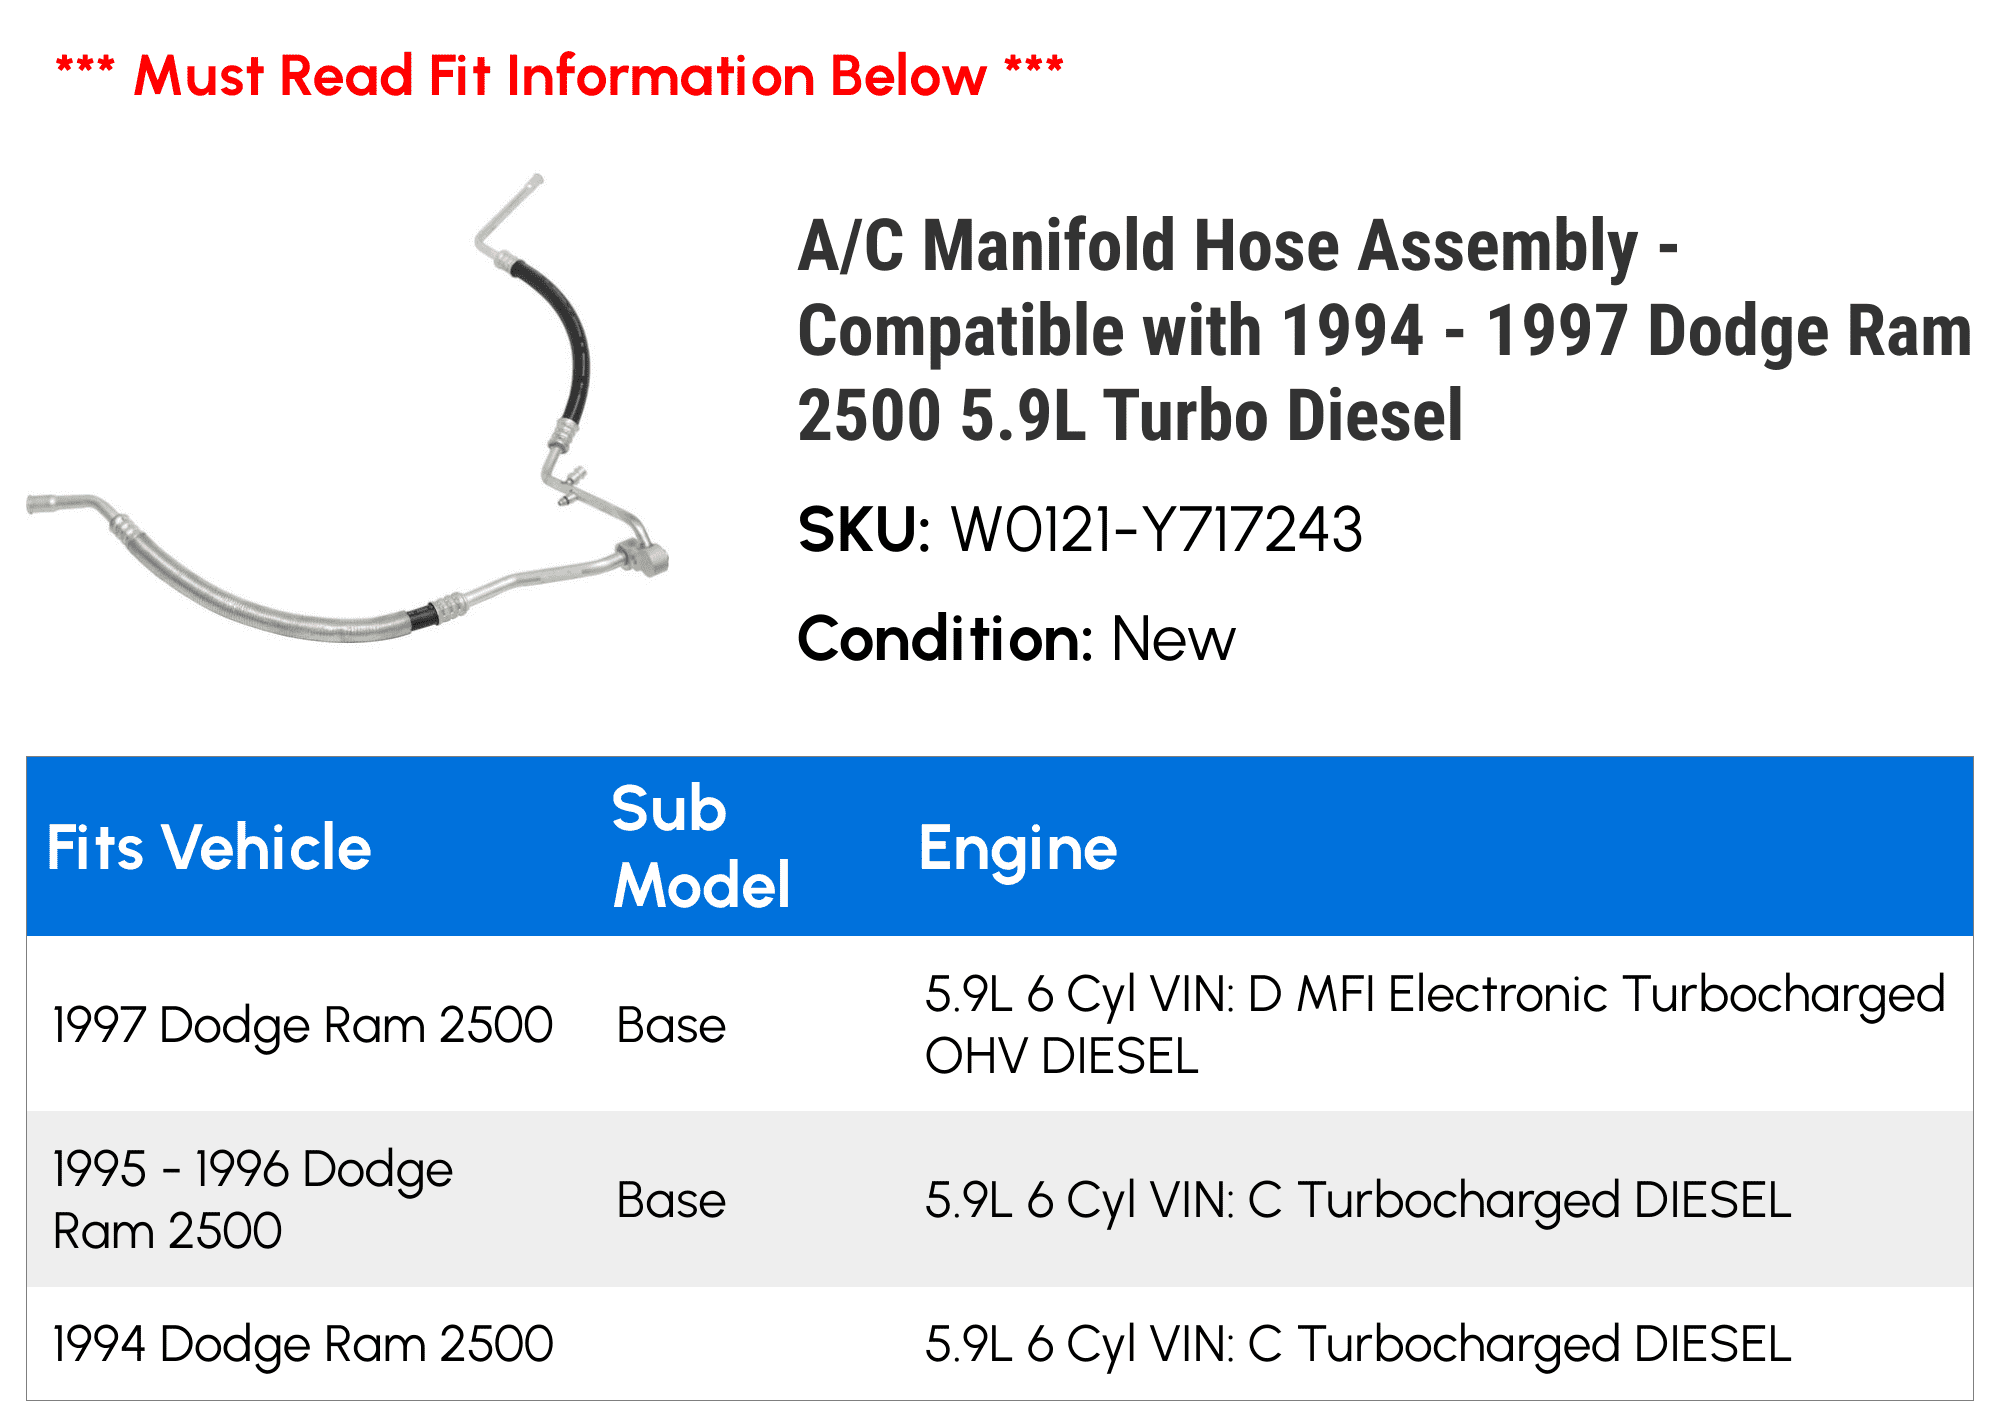 5.9L Replacement A/C Manifold Hose Assembly Fits Dodge Ram 